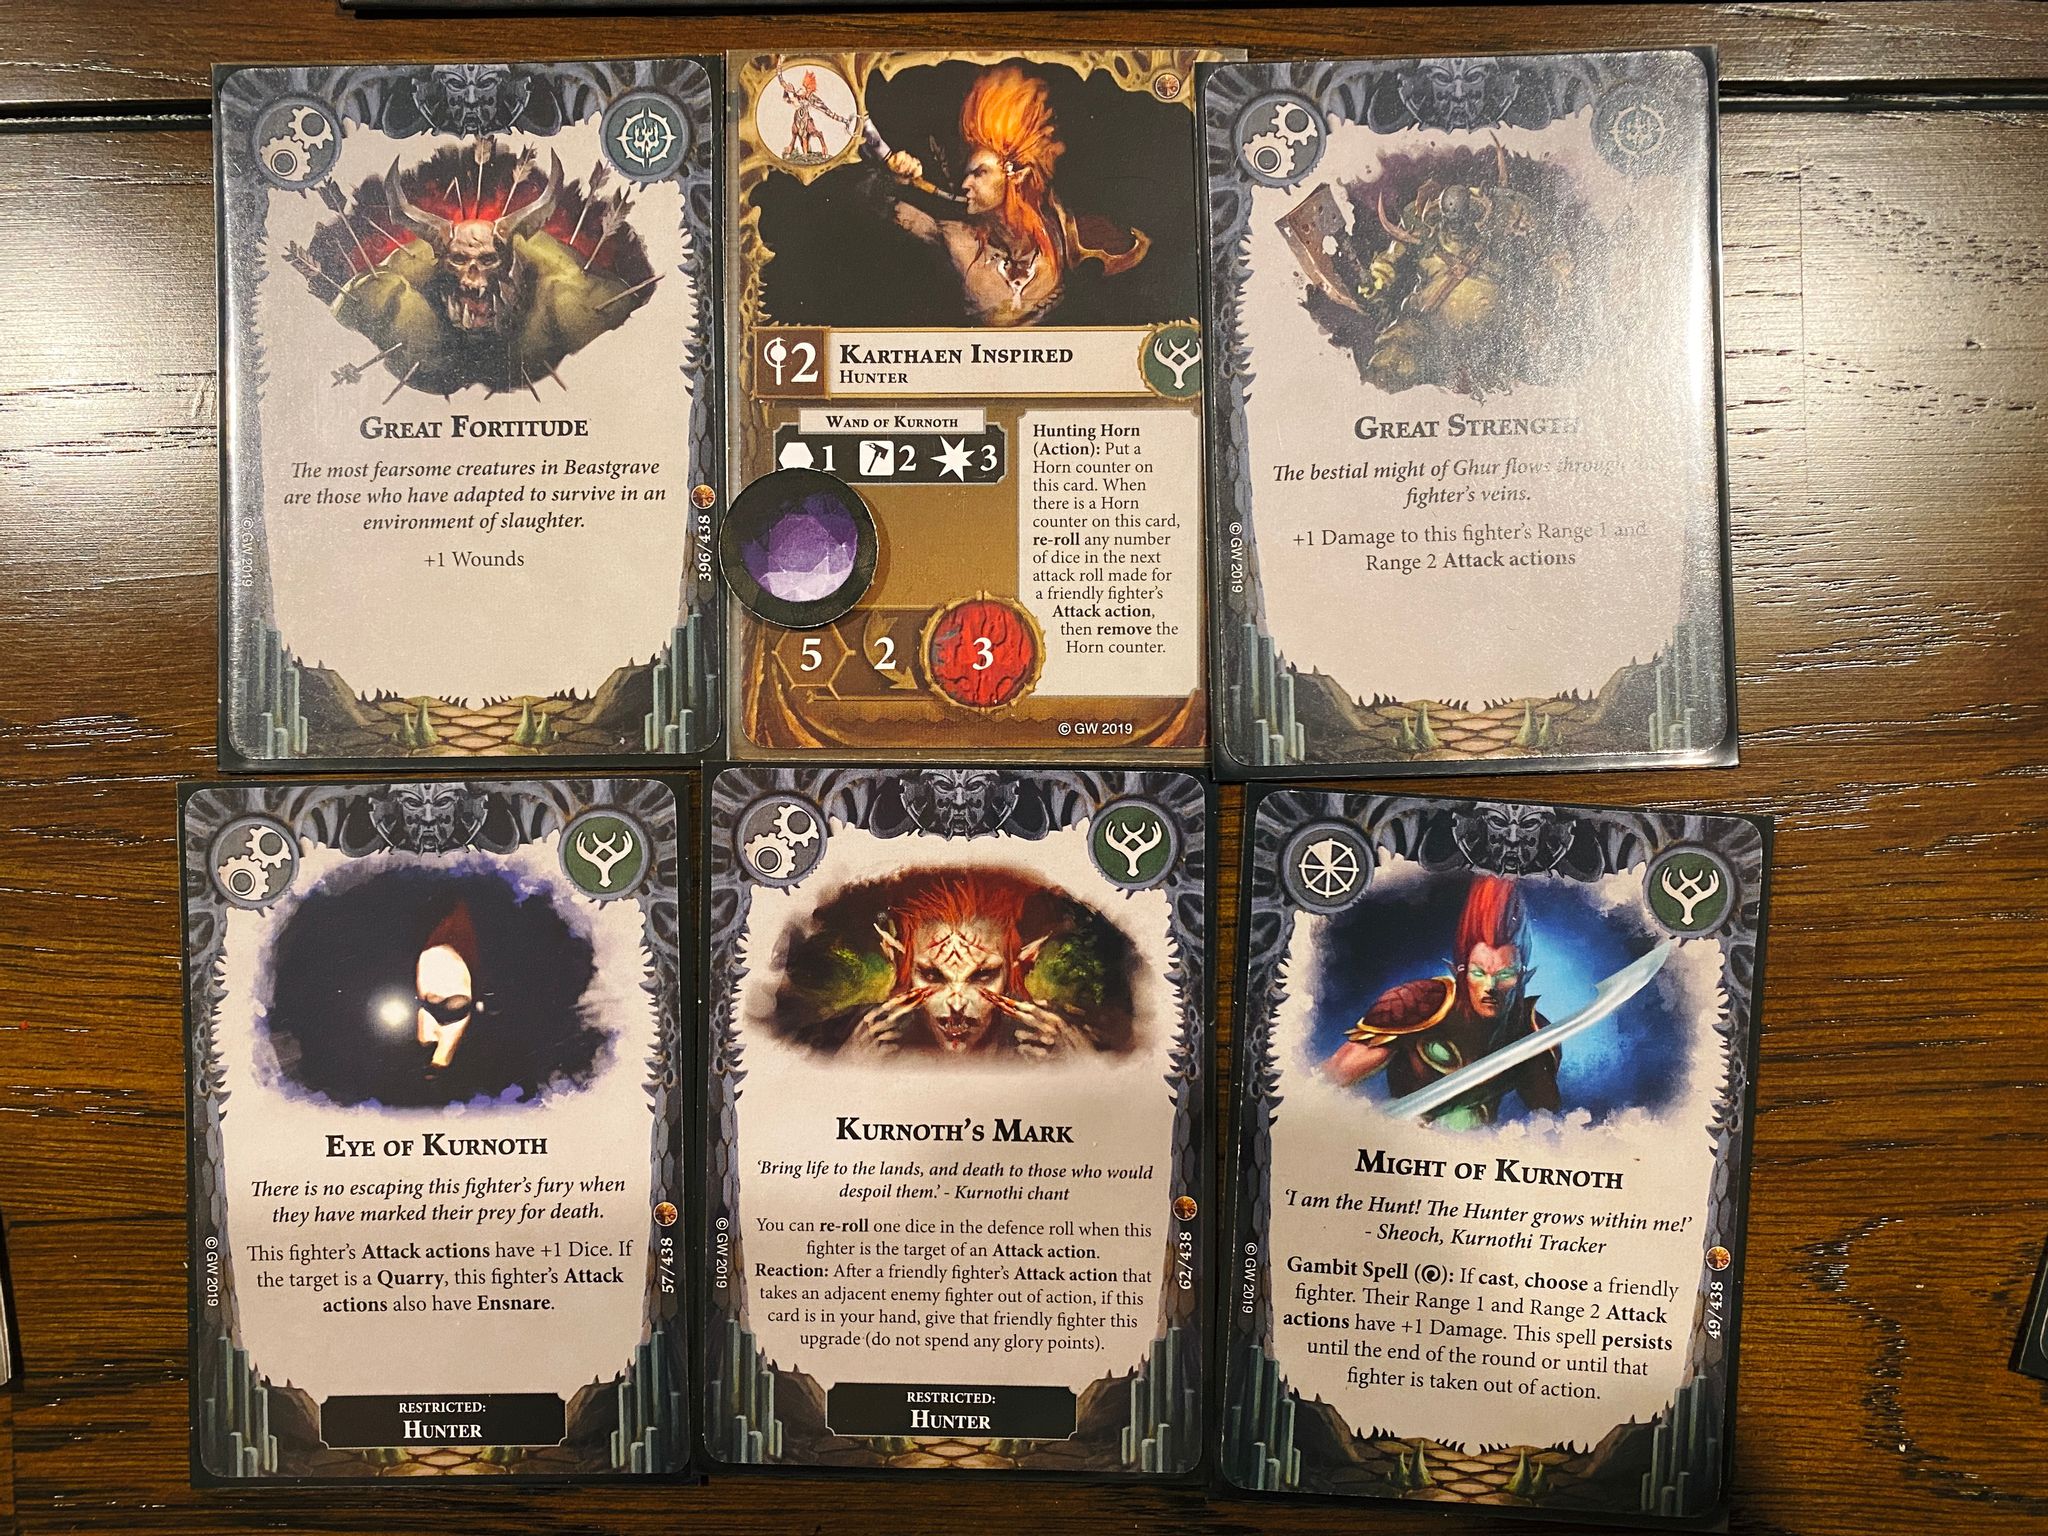 A photo of Karthaen's character card with a bunch of upgrades: Great Fortitude (+1 wounds), Great Strength (+1 damage), Eye of Kurnoth (+1 dice to attack actions), Might of Kurnoth (a temporary +1 damage upgrade), and Kurnoth's Mark (grants the ability to re-roll one dice in the defence roll).